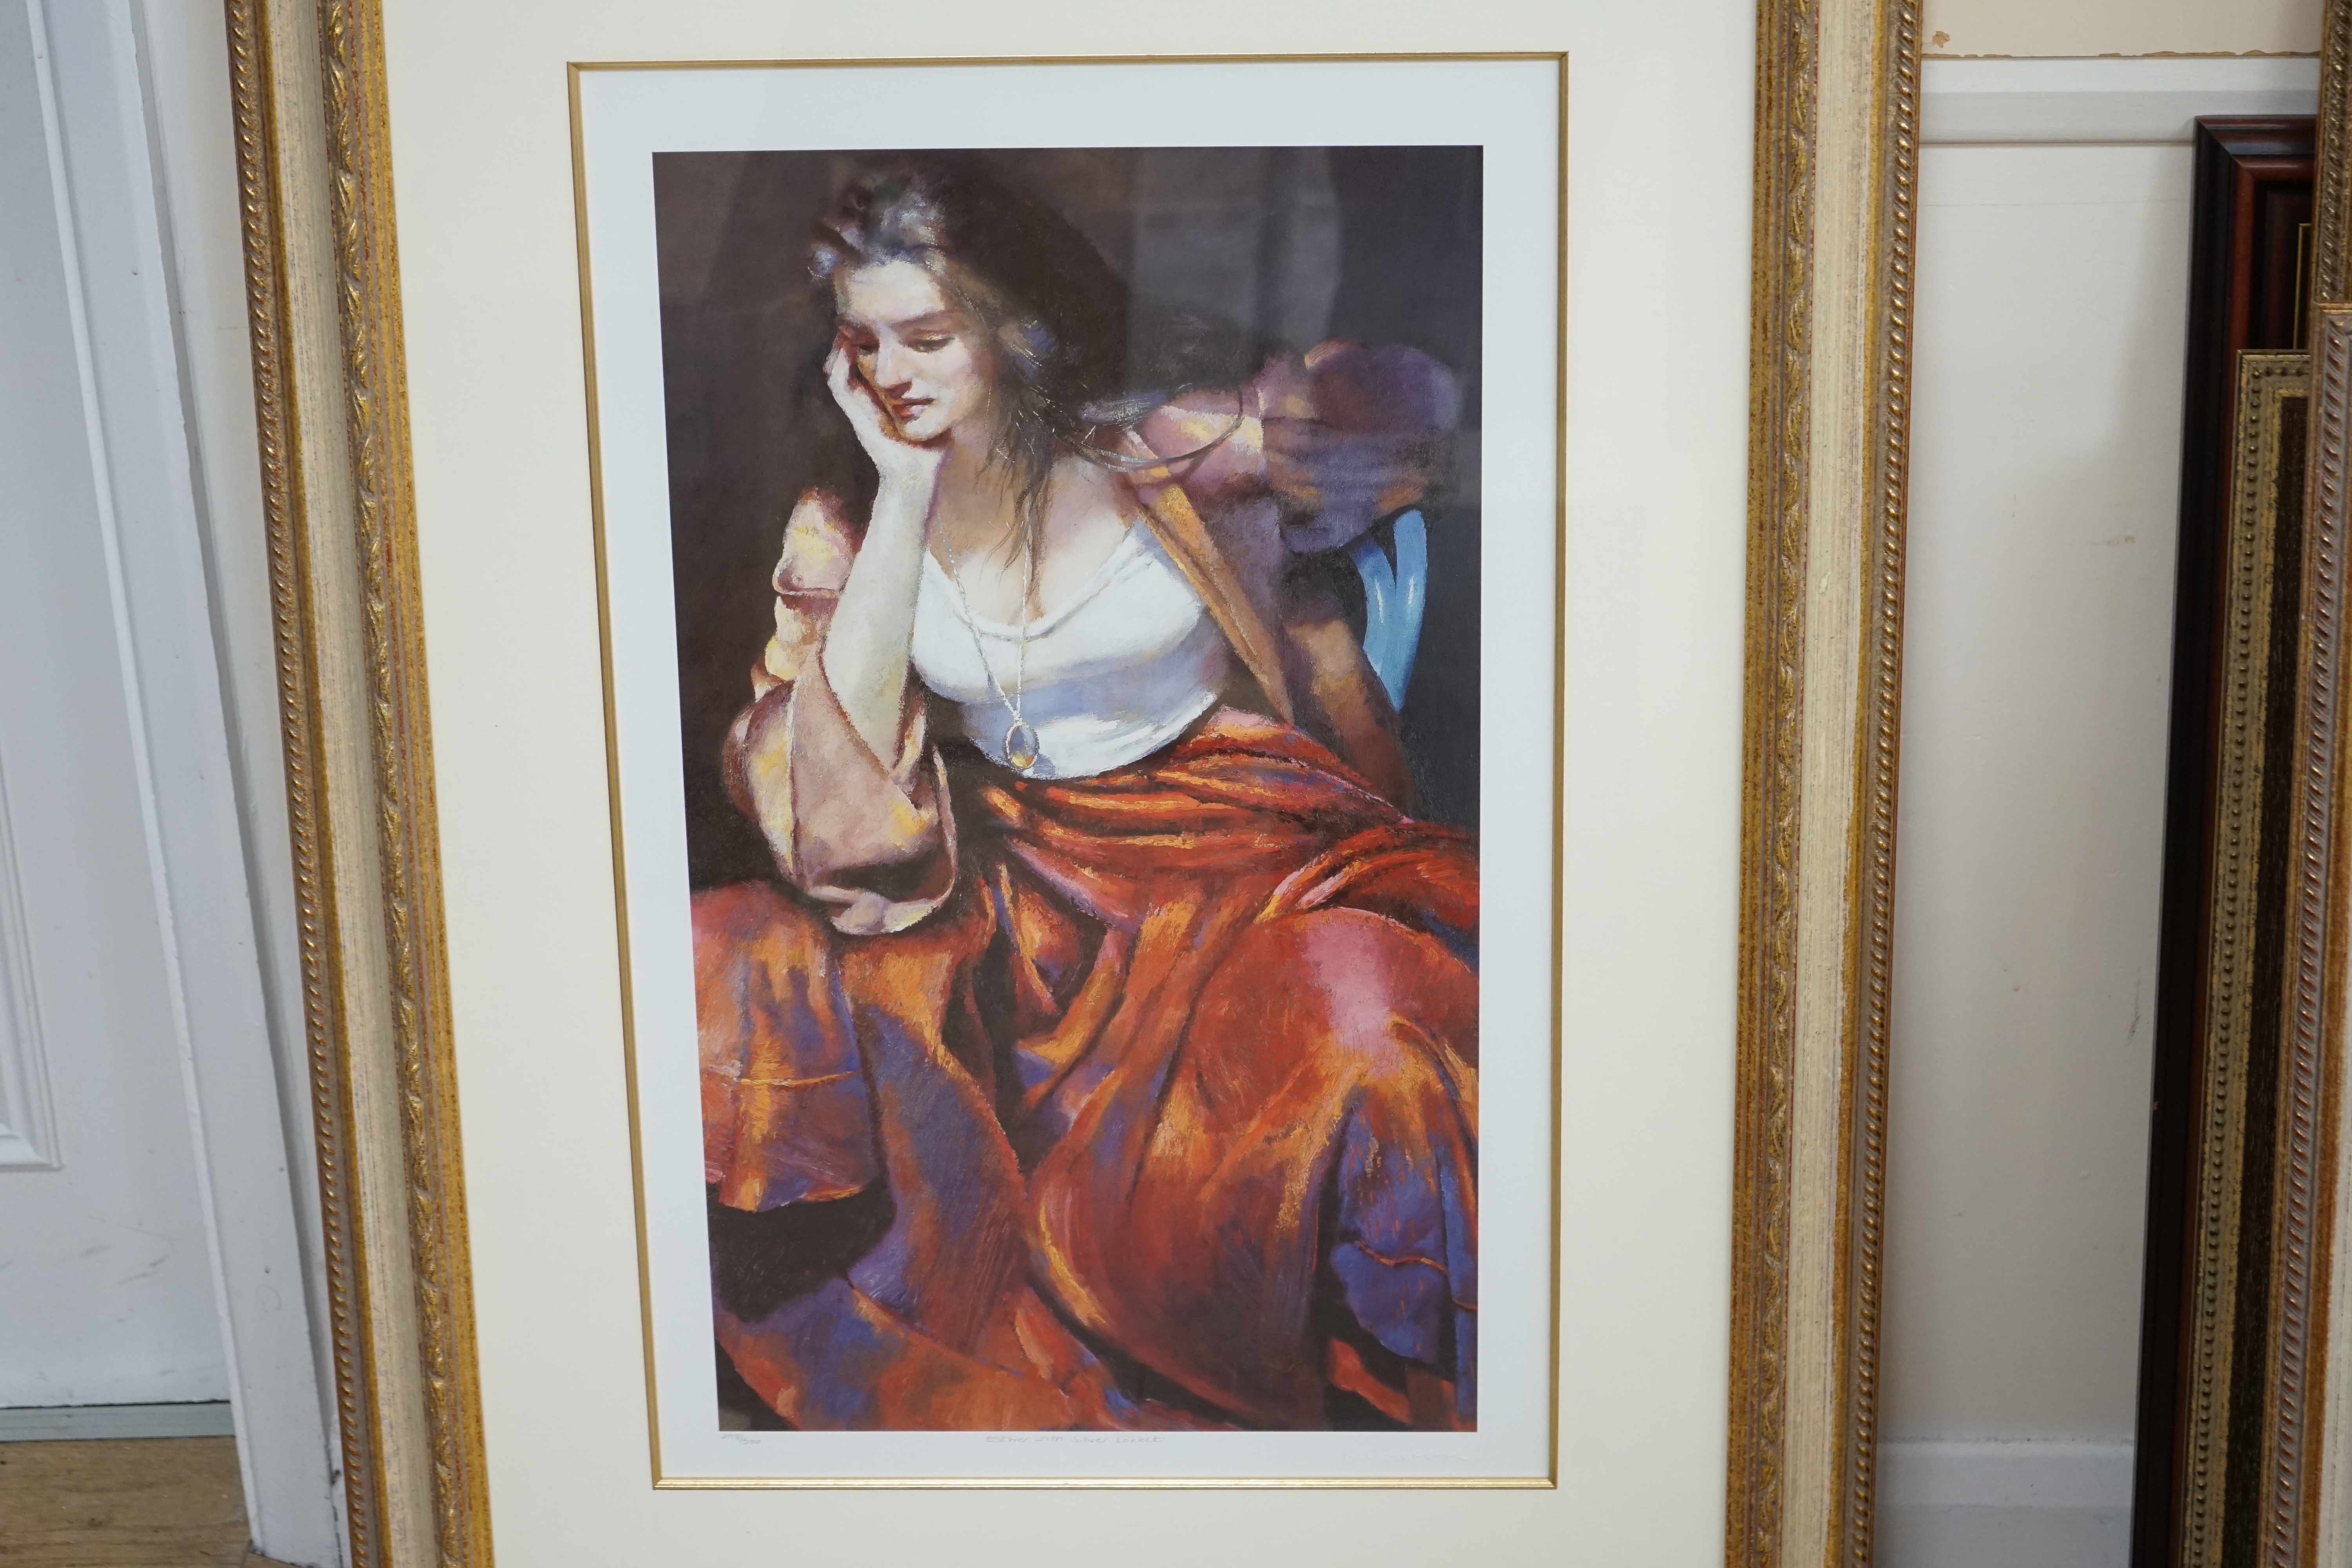 Robert Lenkiewicz (1941-2002), offset lithograph blind stamp signature, 'Esther with silver locket', title in pencil, 298/500, 60 x 35cm. Condition - good